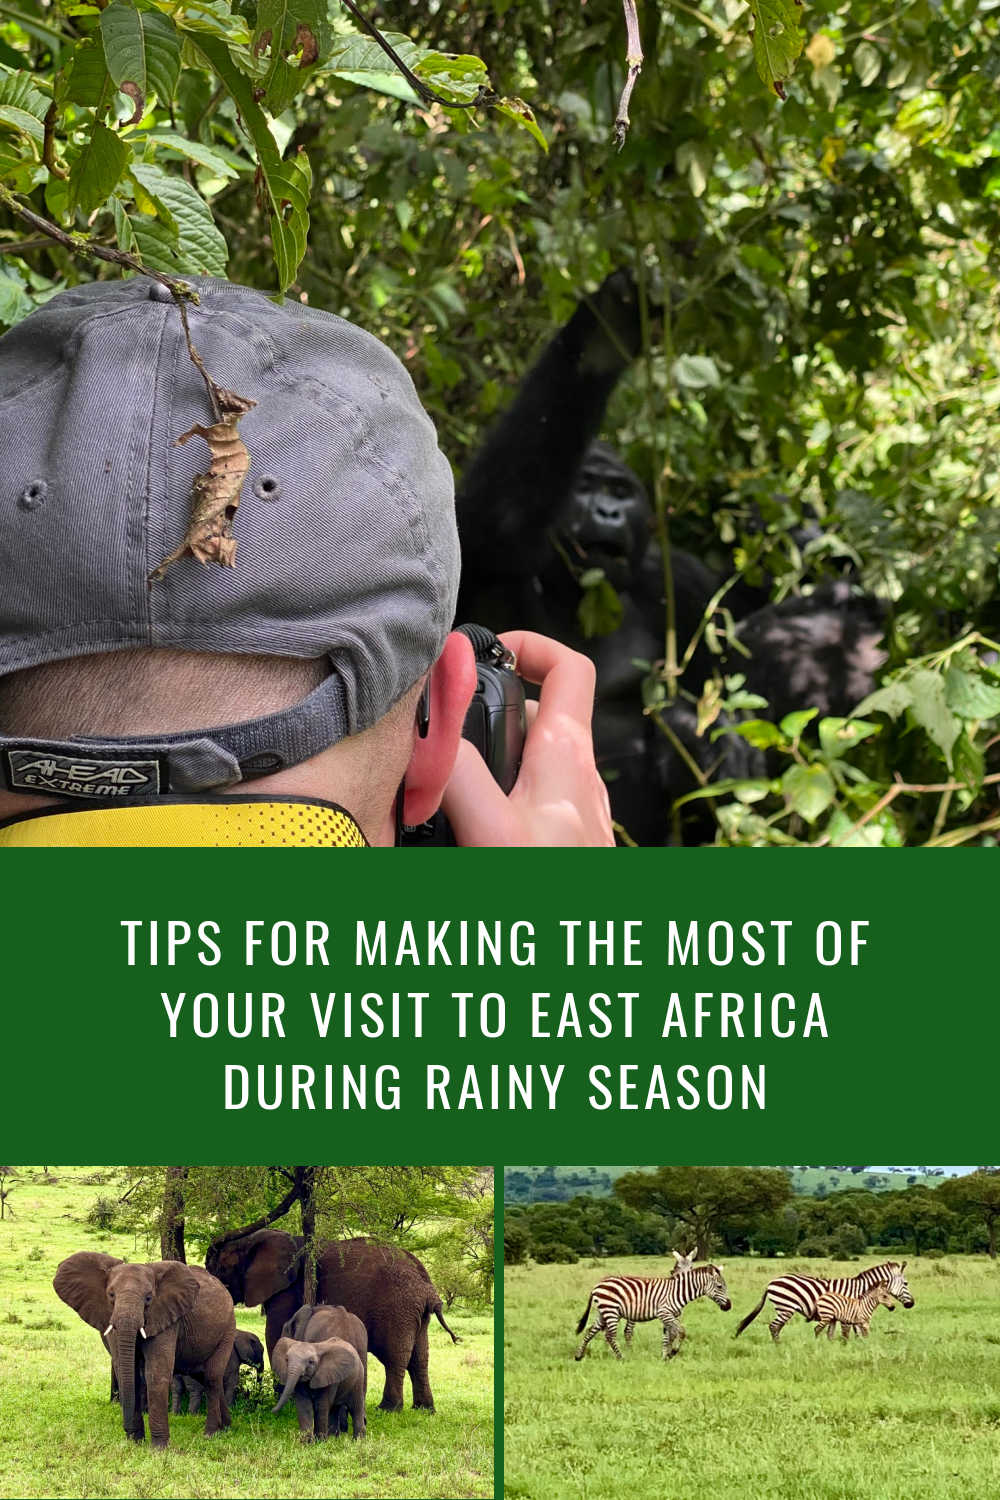 VISITING AFRICA DURING THE RAINY SEASON